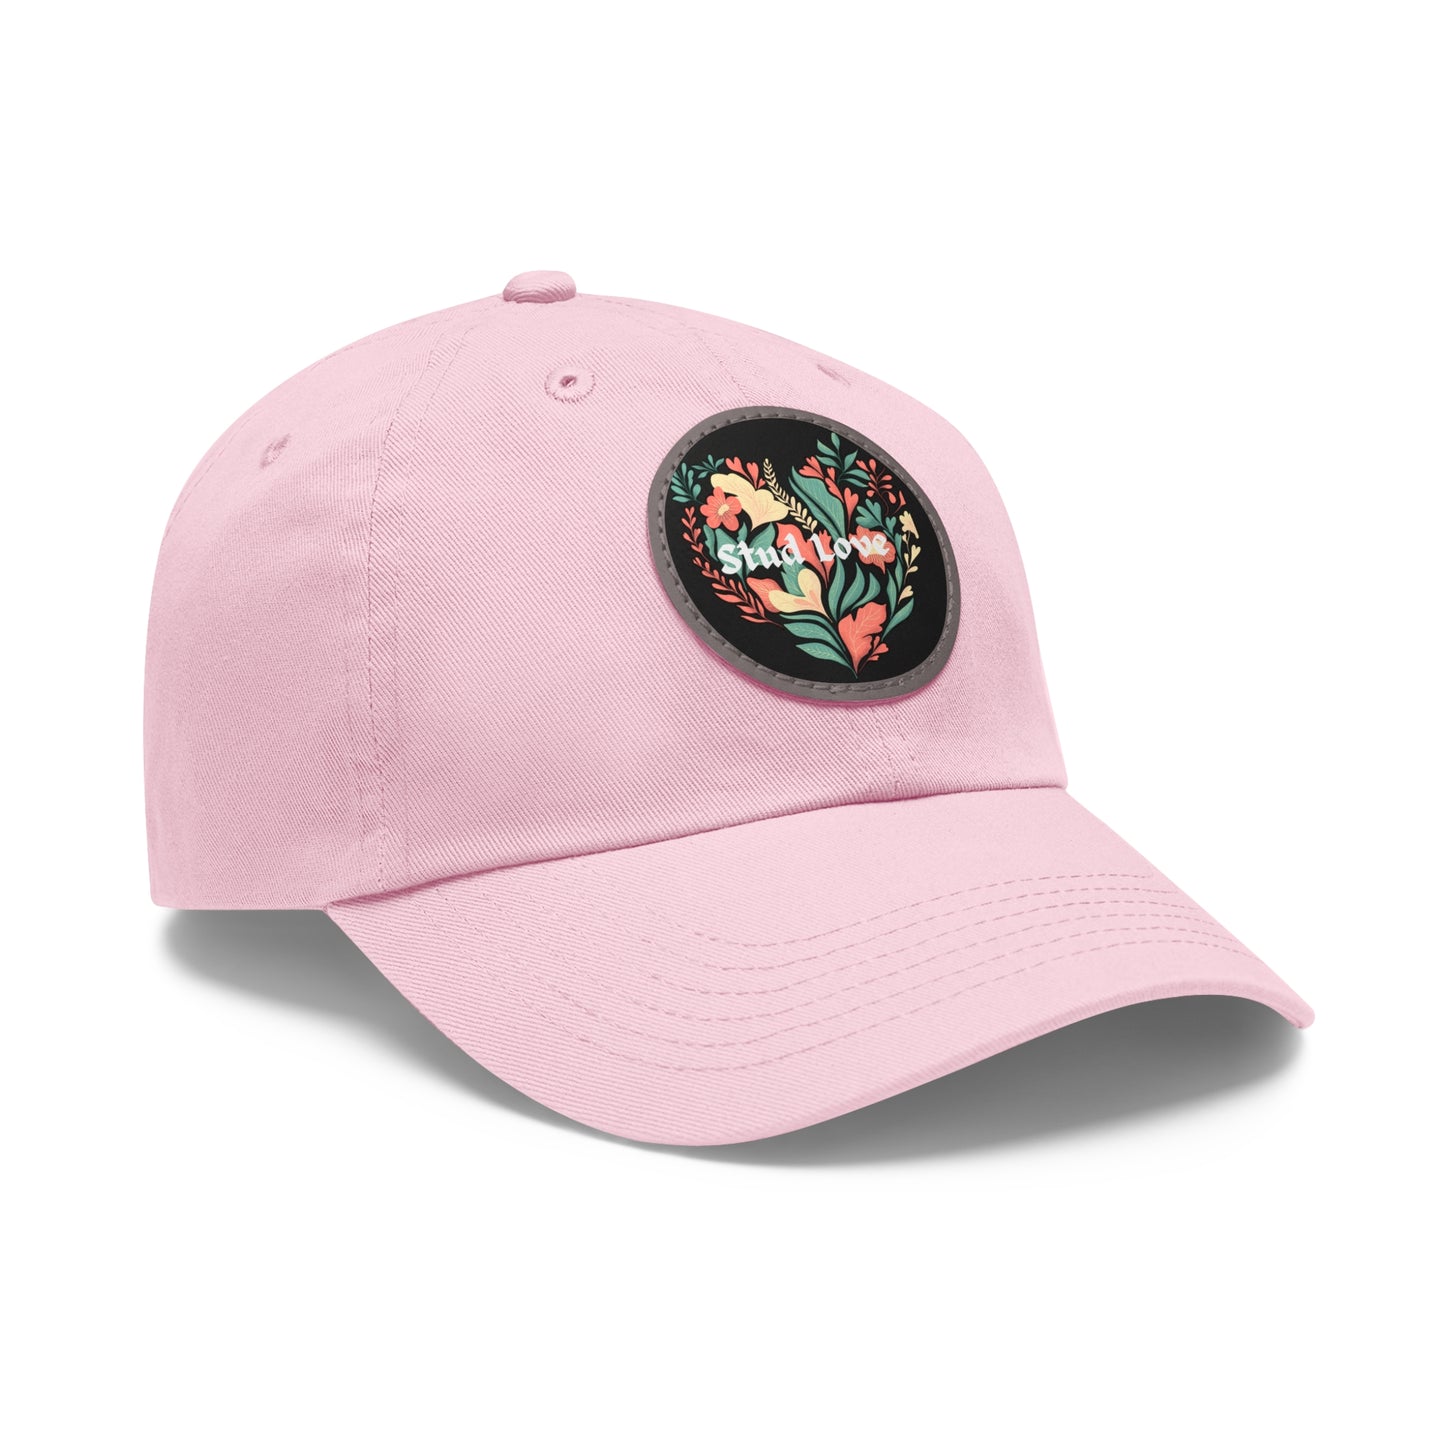 Stud Love Floral Blk Hat with Leather Patch (Round)